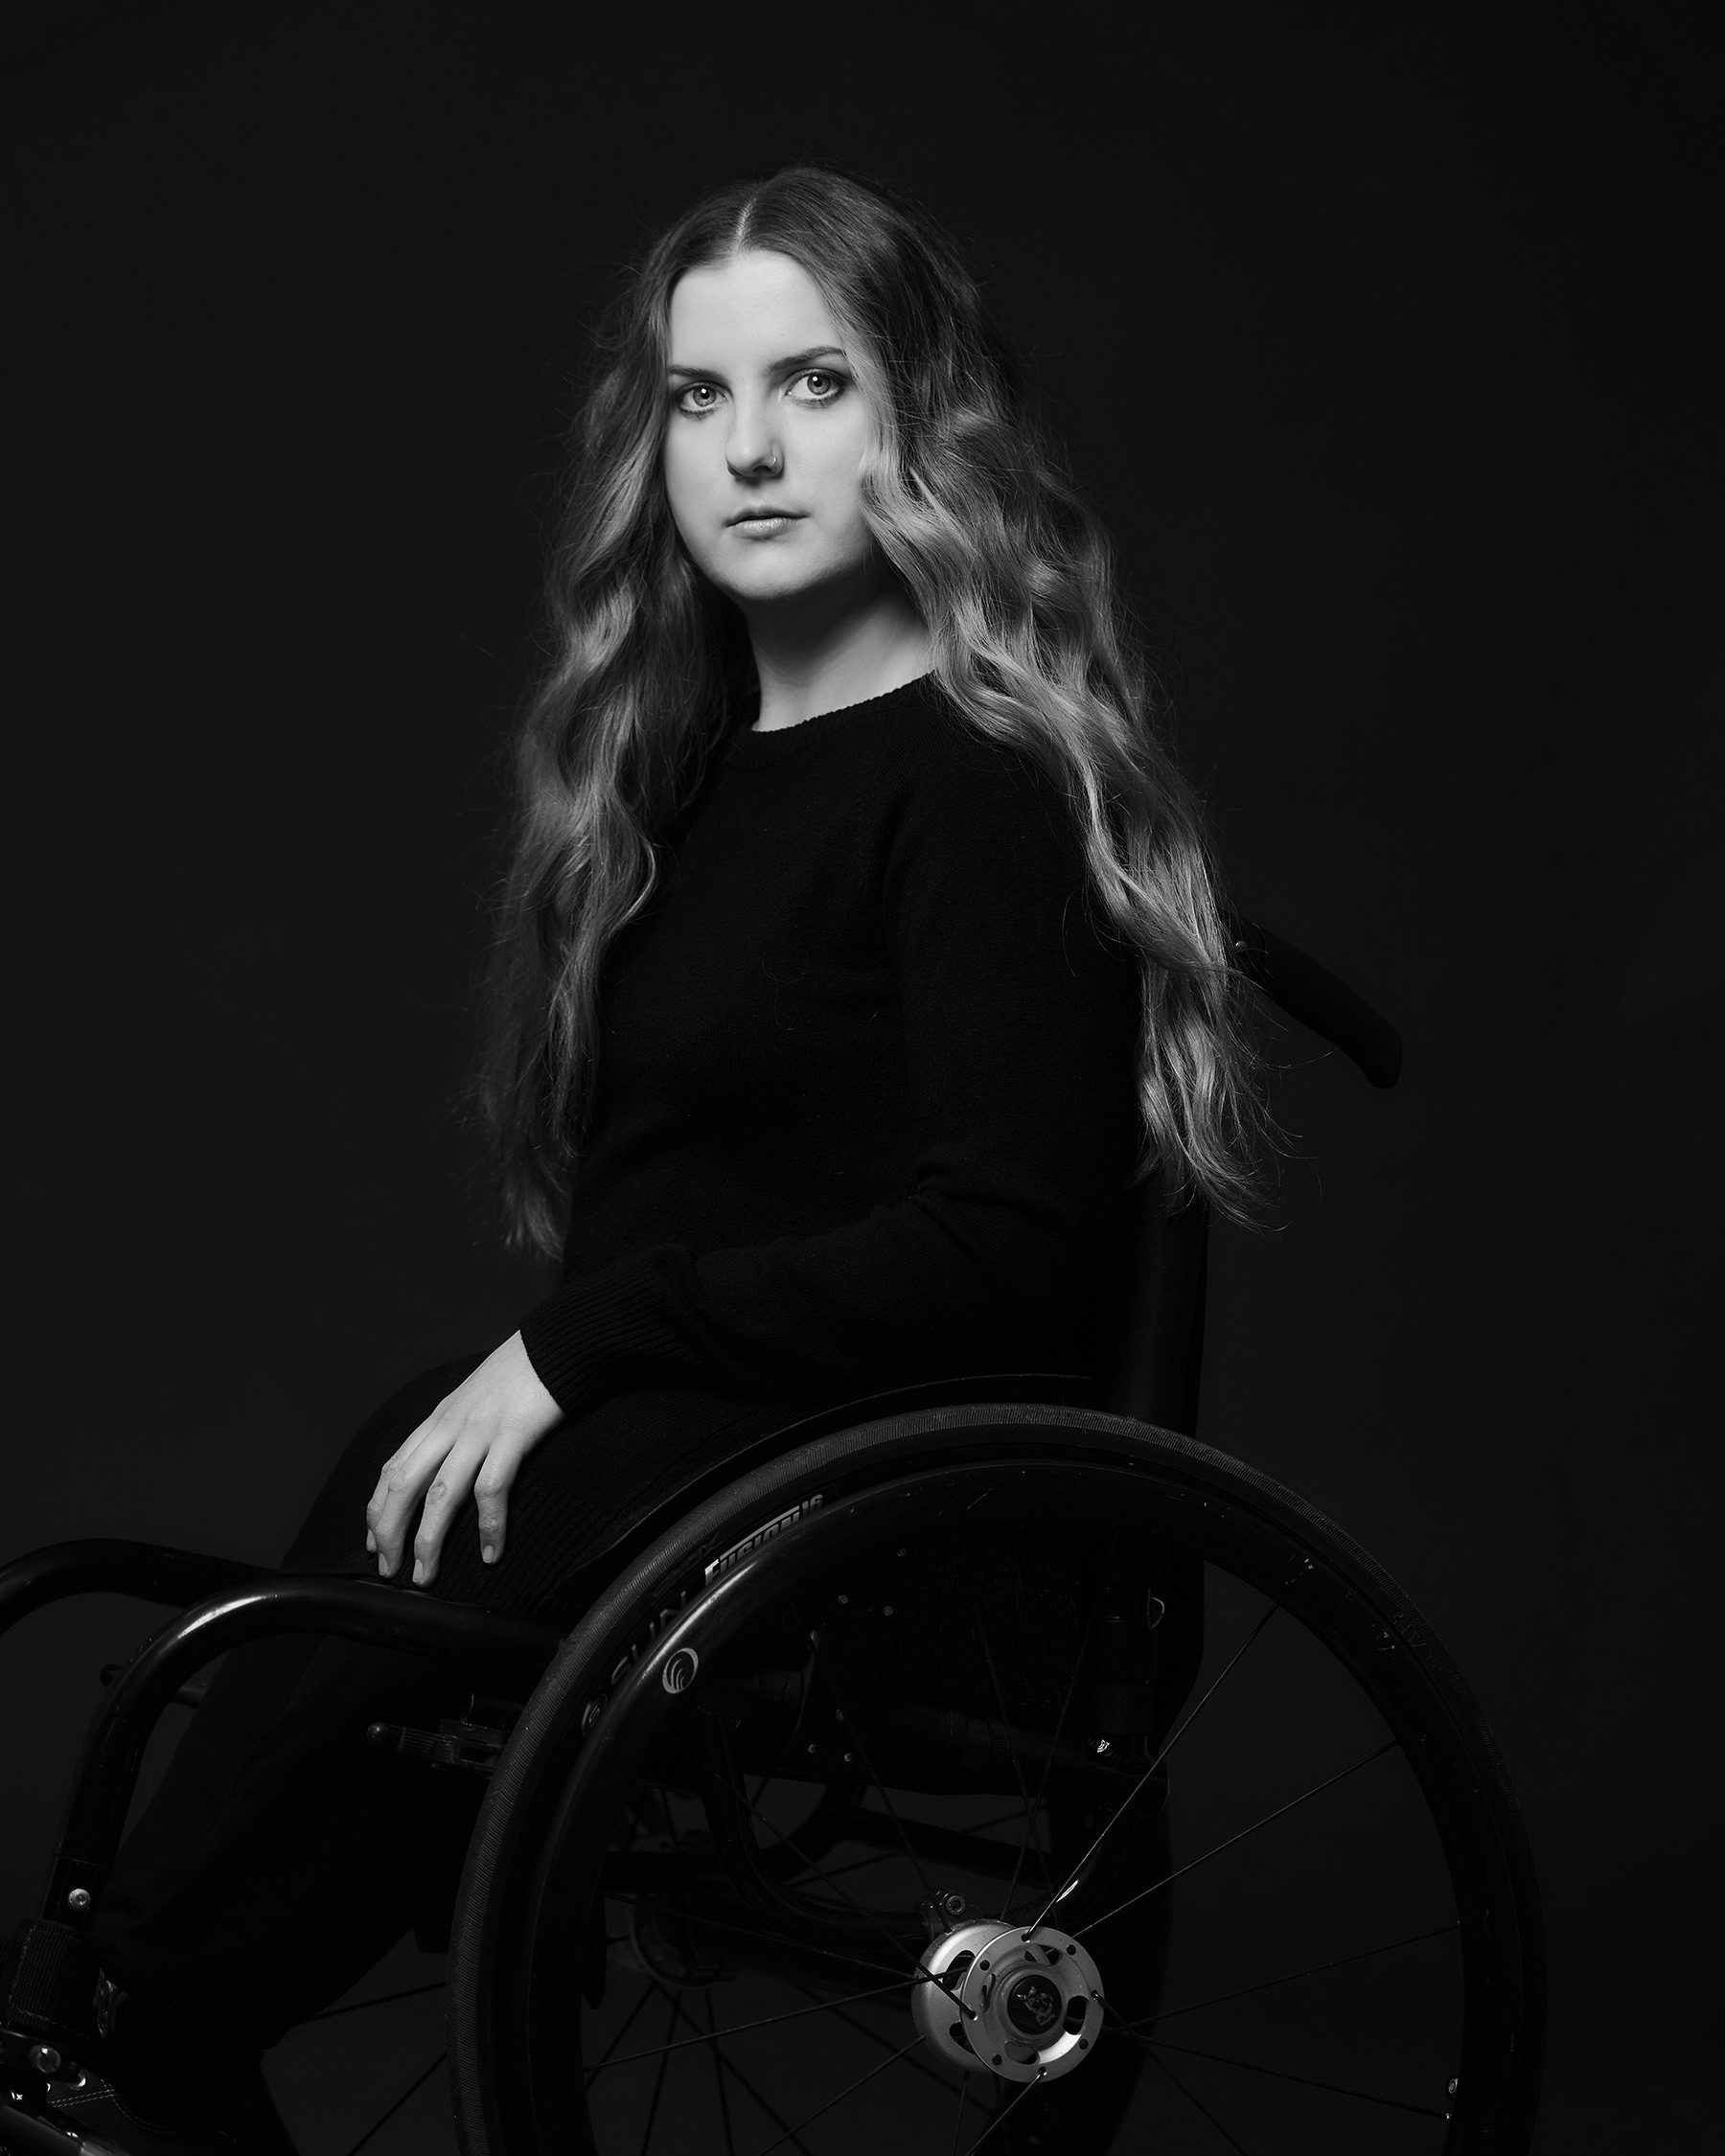 Ella Glendining looking straight ahead. She has light-colored, wavy, waist-length hair. She is wearing dark clothes and is sitting in a wheelchair. Black and white portrait.